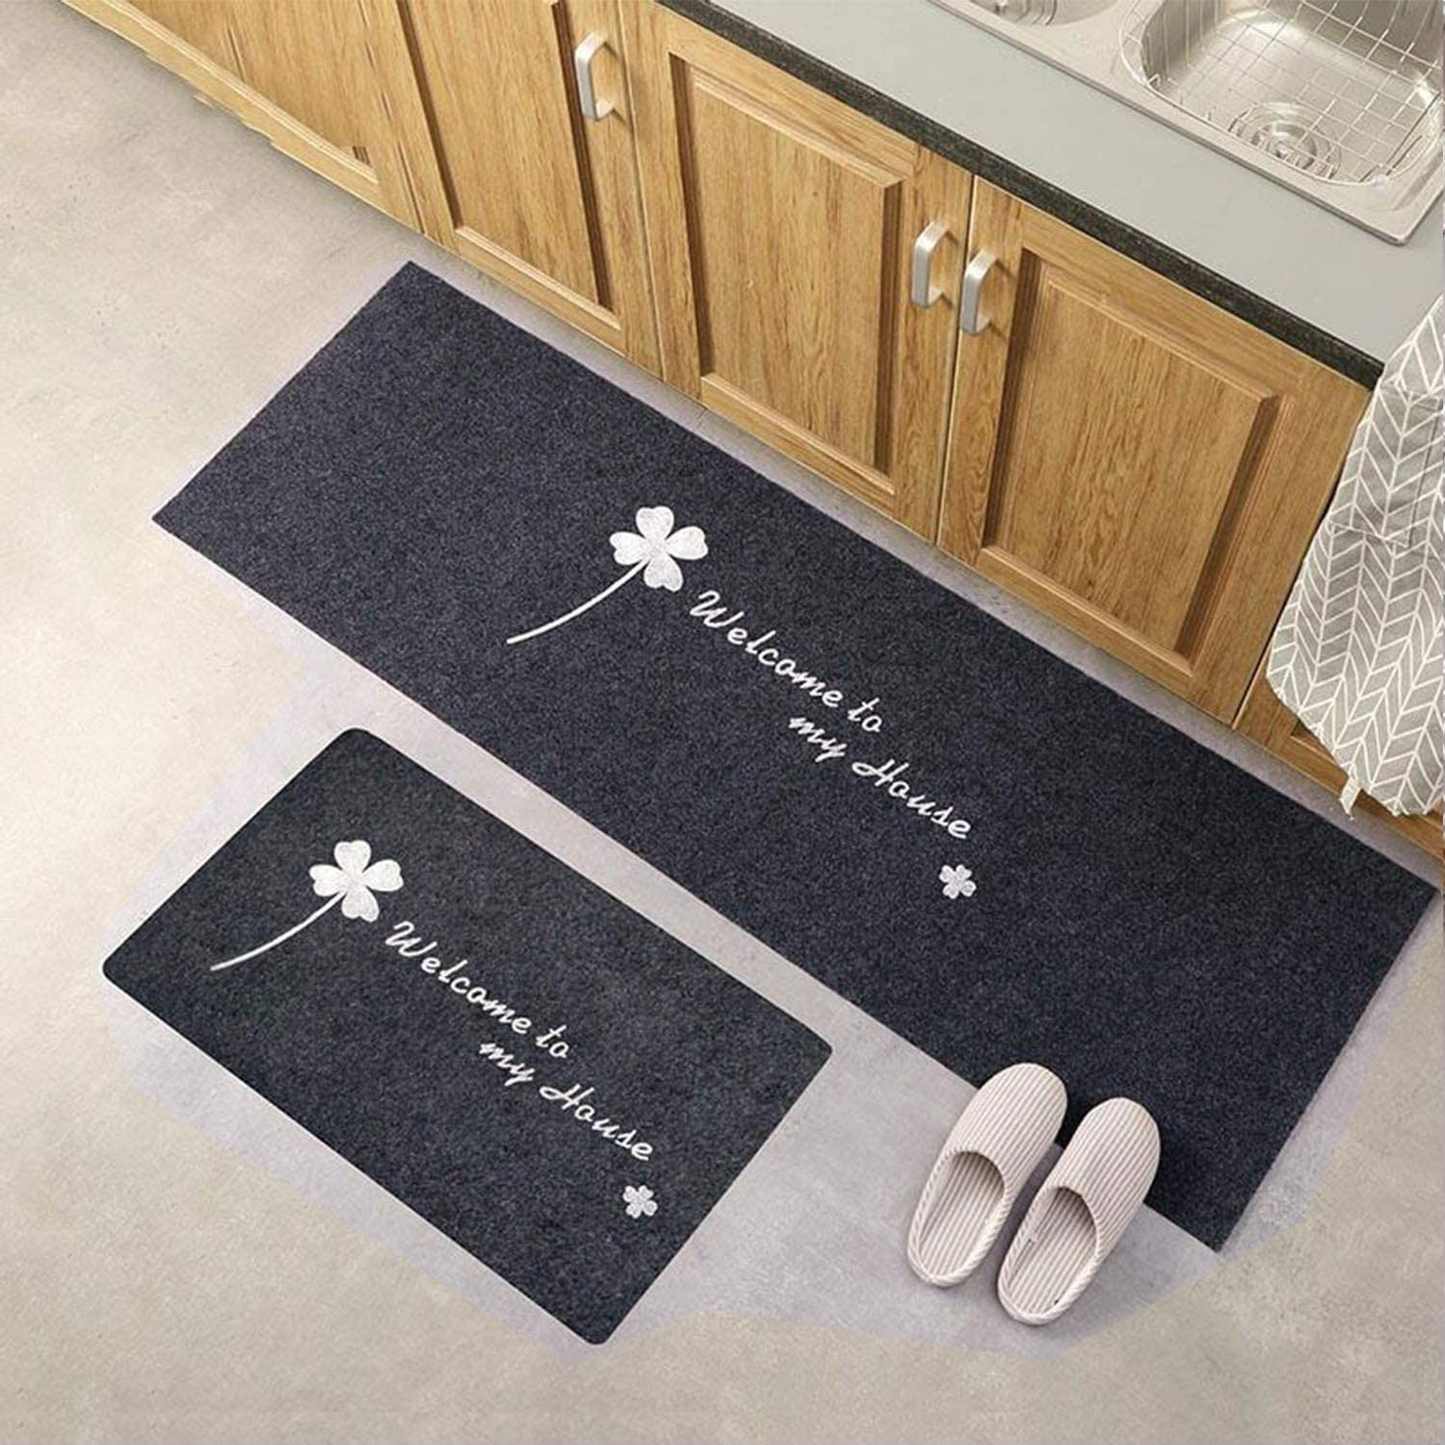 Kitchen Rugs Mats Washable Non Skid Slip - Made of Polypropylene 2 Pieces Sets